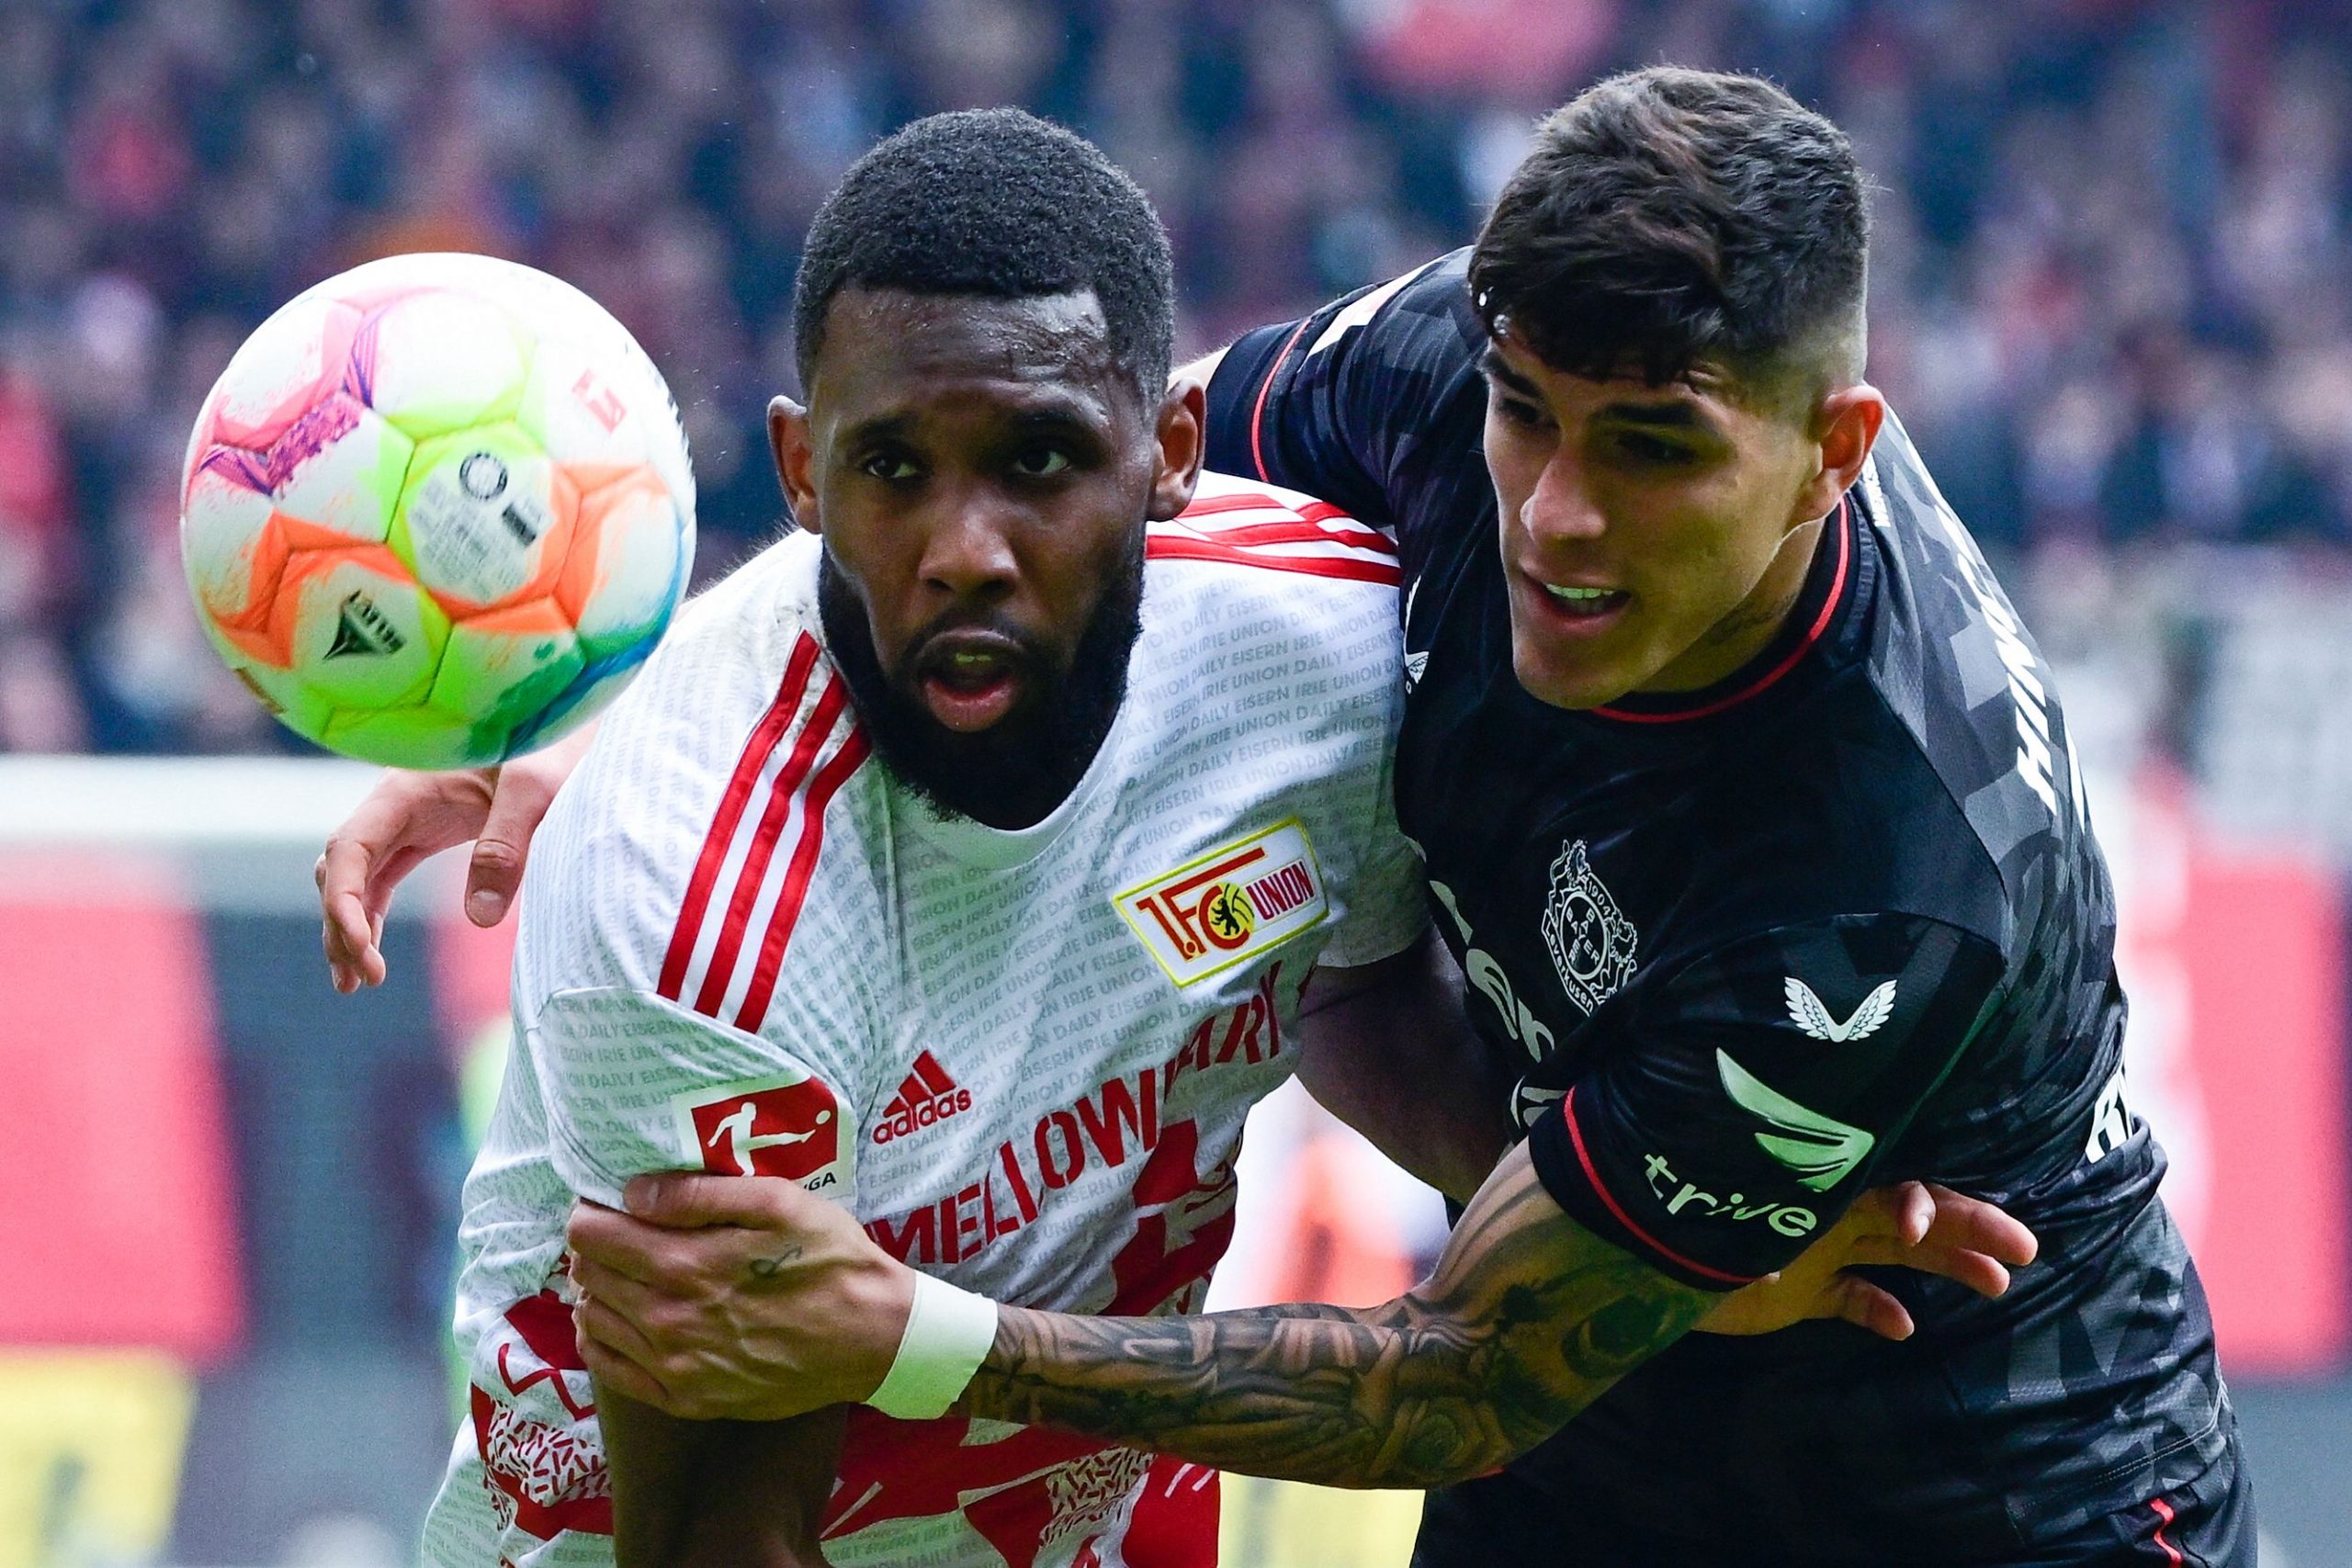 Leverkusen's Ecuadorian defender Piero Hincapie (R) and Union Berlin's French forward Jordan Siebatcheu vie for the ball during the German first division Bundesliga football match between Union Berlin and Bayer 04 Leverkusen in Berlin on April 29, 2023. (Photo by John MACDOUGALL / AFP) / DFL REGULATIONS PROHIBIT ANY USE OF PHOTOGRAPHS AS IMAGE SEQUENCES AND/OR QUASI-VIDEO (Photo by JOHN MACDOUGALL/AFP via Getty Images)